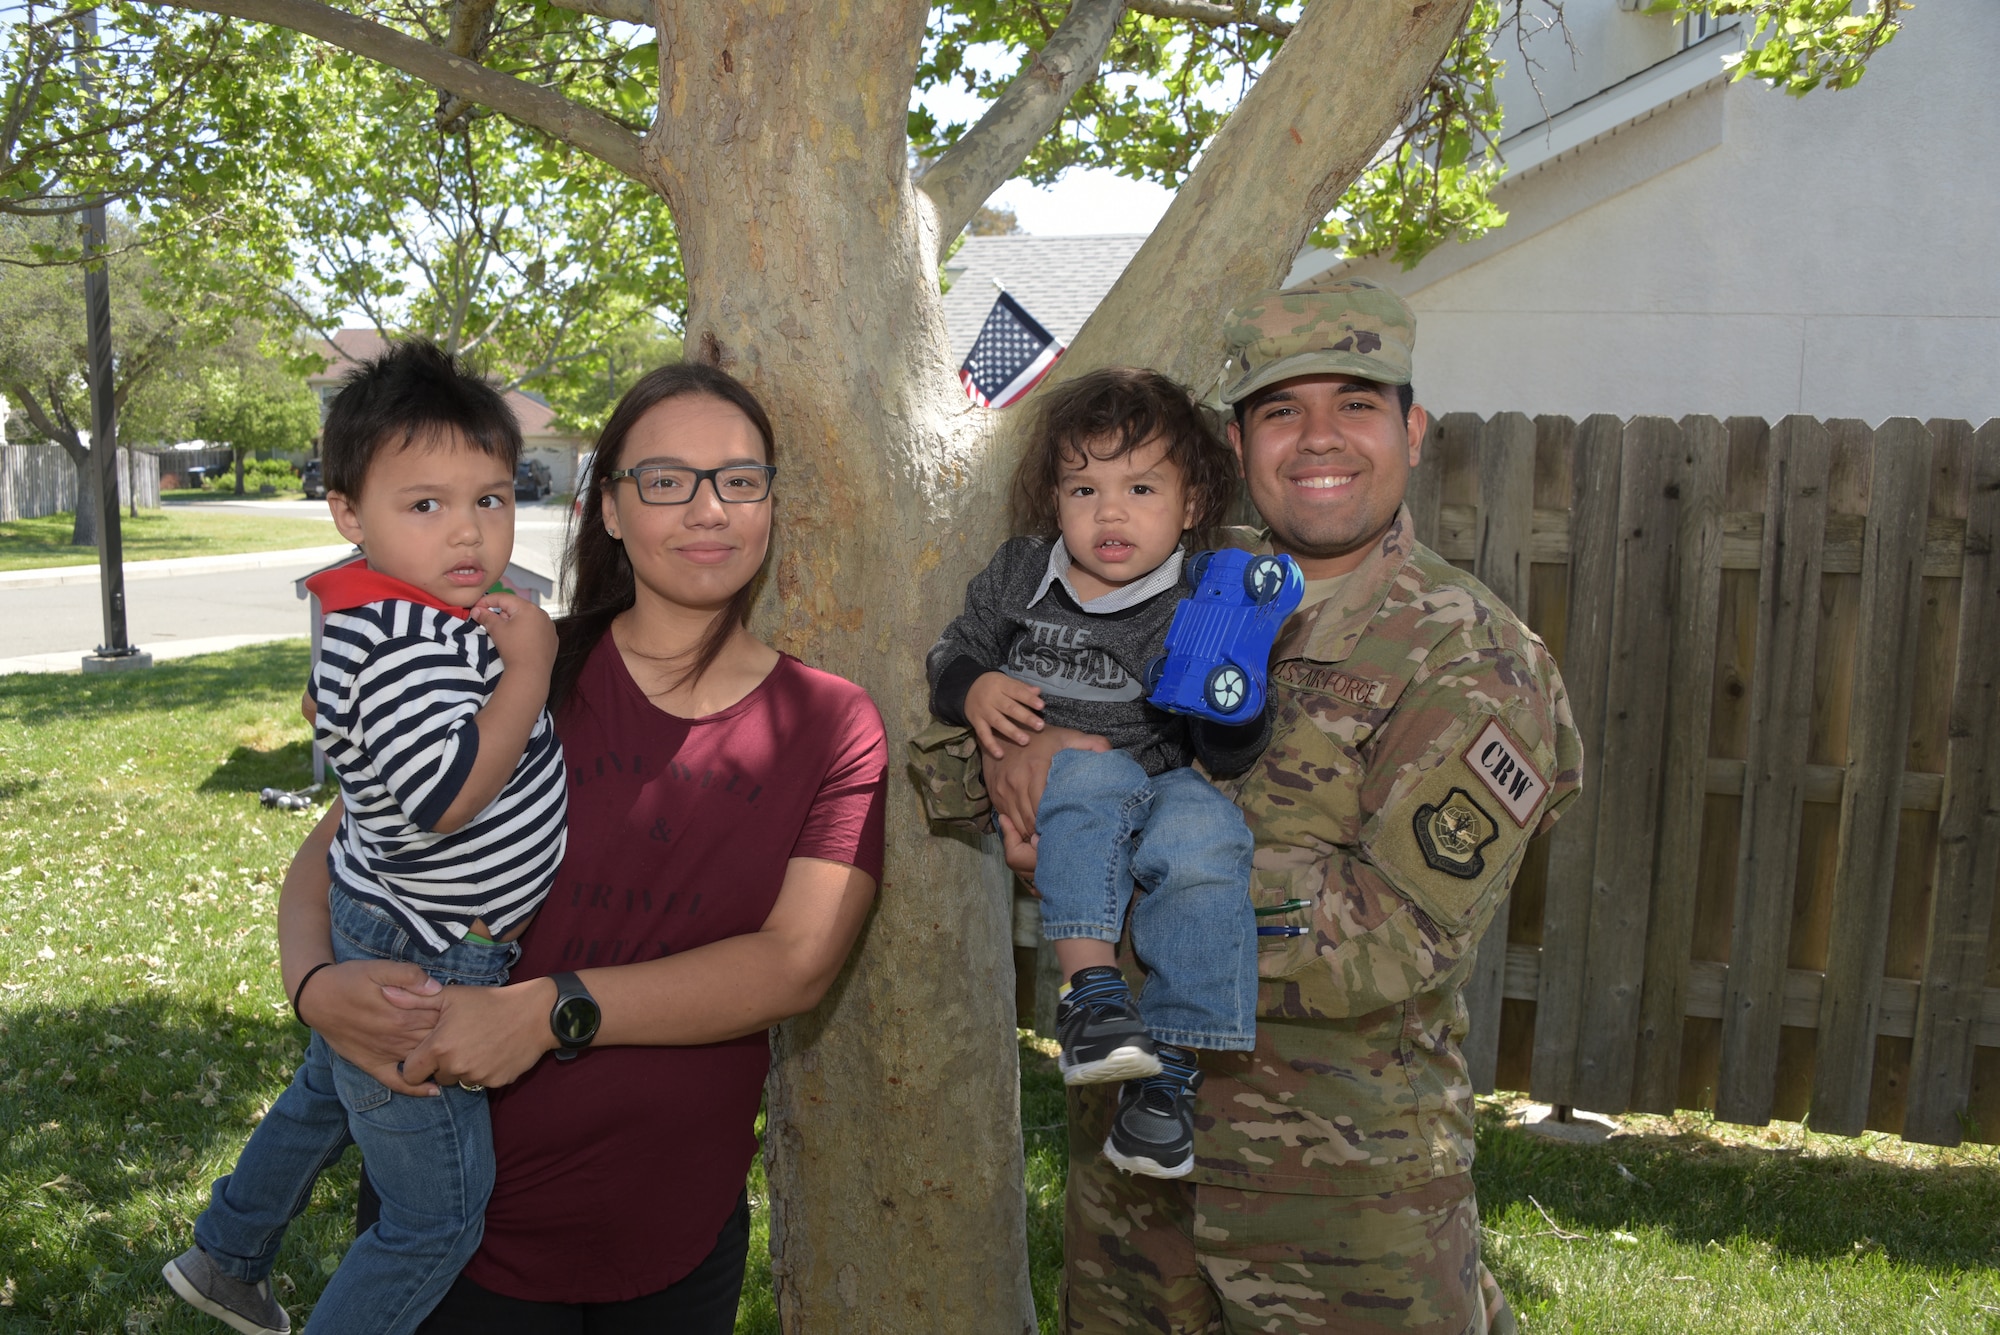 Savannah Ruiz (Left) and her husband, Senior Airman Ruben Ruiz (Right), 921st Contingency Response Squadron aerial porter, pose for a photo with their children outside their home at Travis Air Force Base, Calif., April 26, 2018. The couple attended the Financial Peace Military course and used what they learned to pay off three credit cards, reducing their debt by $5,000. (U.S. Air Force photo by Tech. Sgt. James Hodgman)